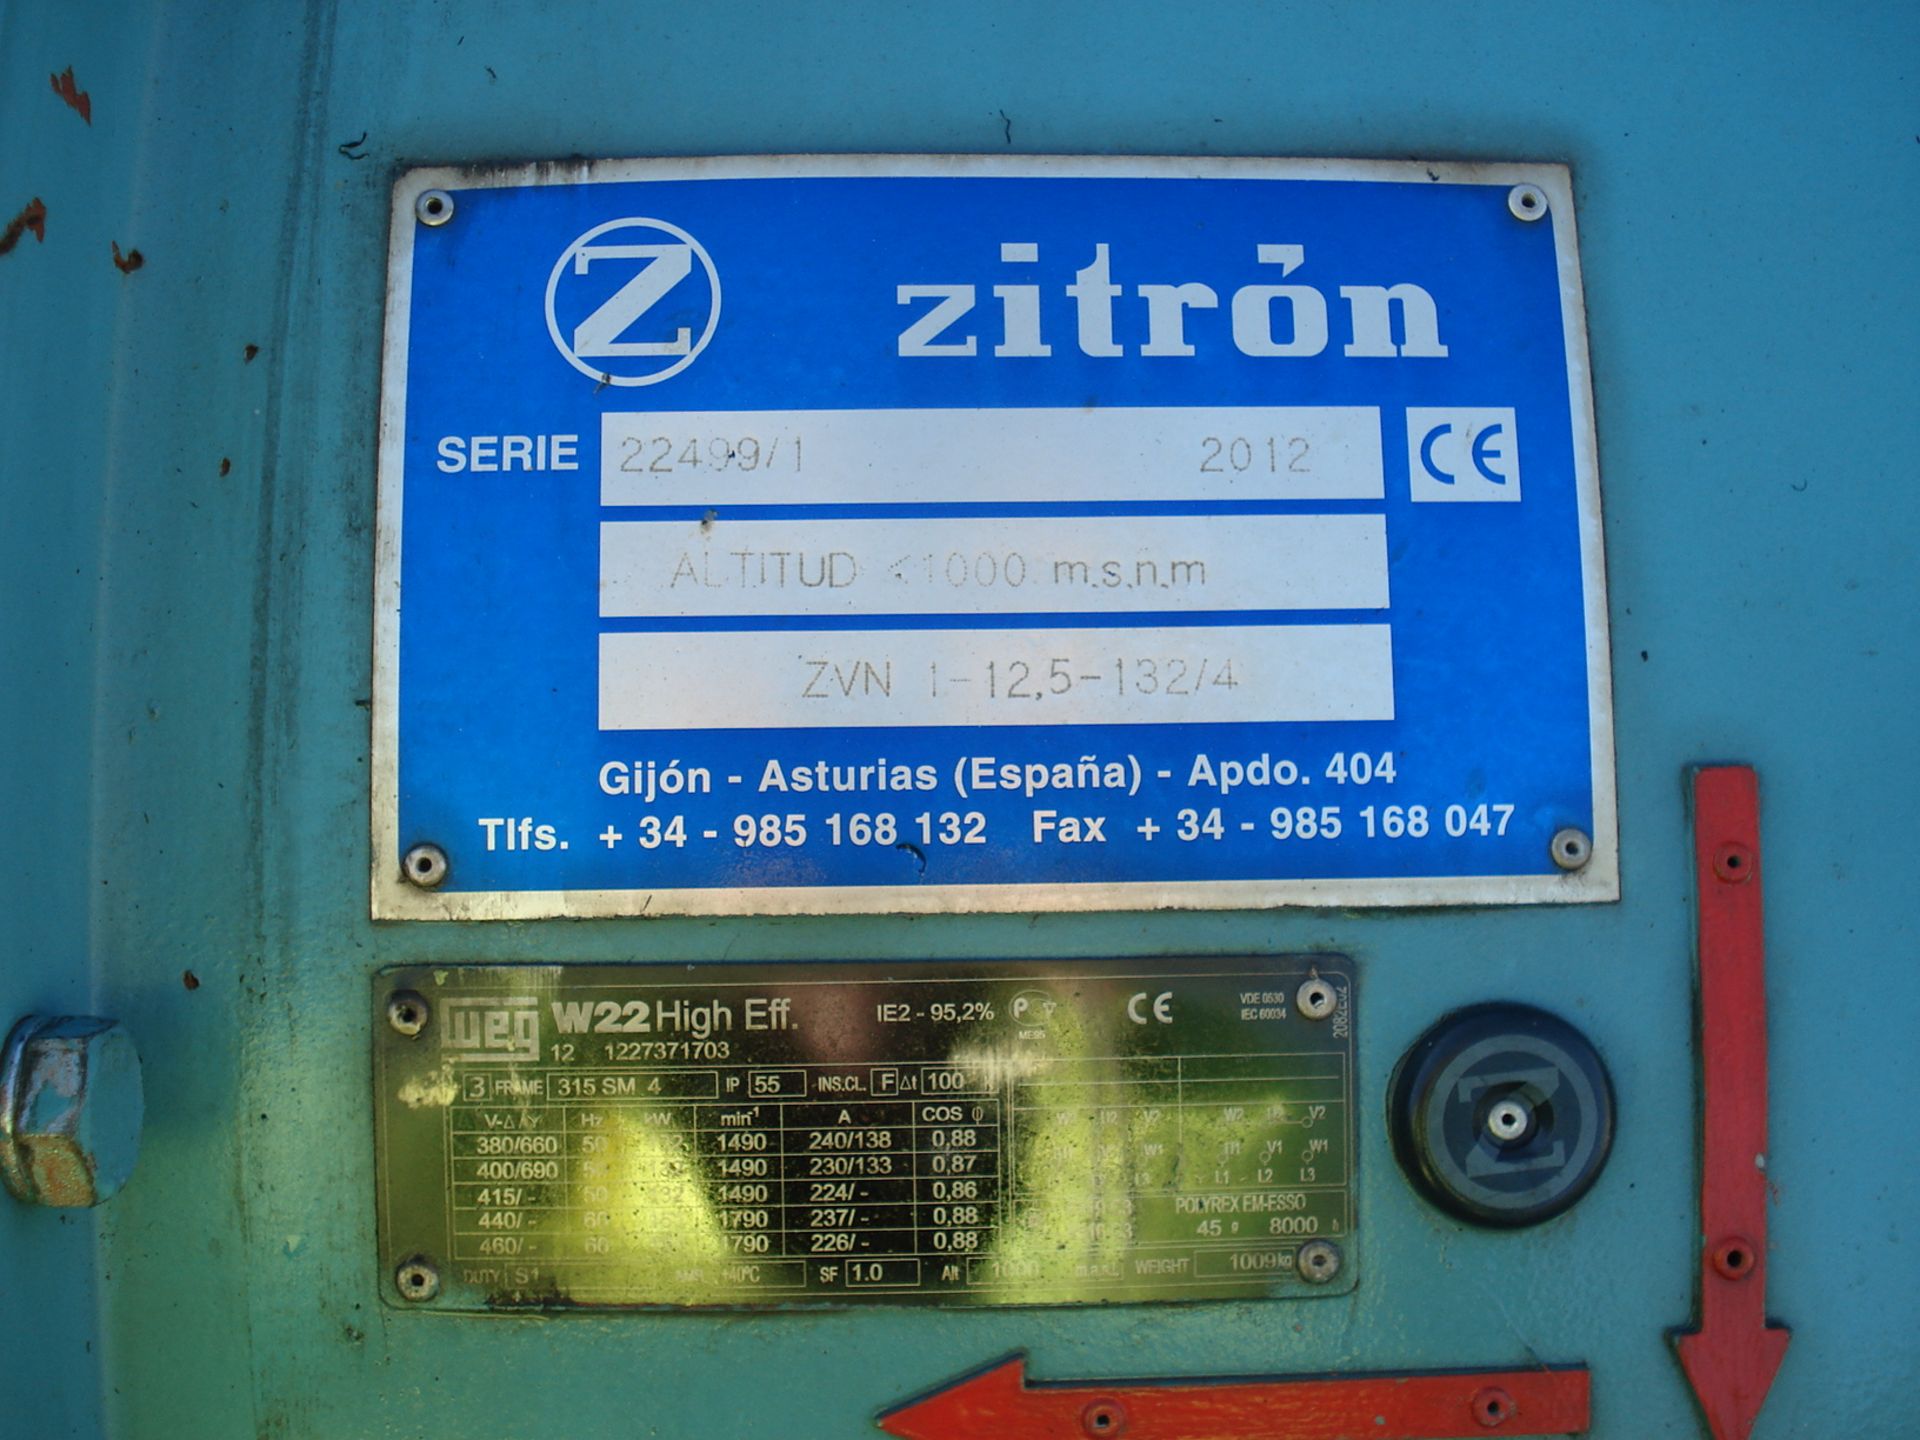 Zitron (Green) Large Air Circulation Fan - ZVN 1-12,5-132/4 - YOM 2012 - + Control Unit - Image 2 of 5